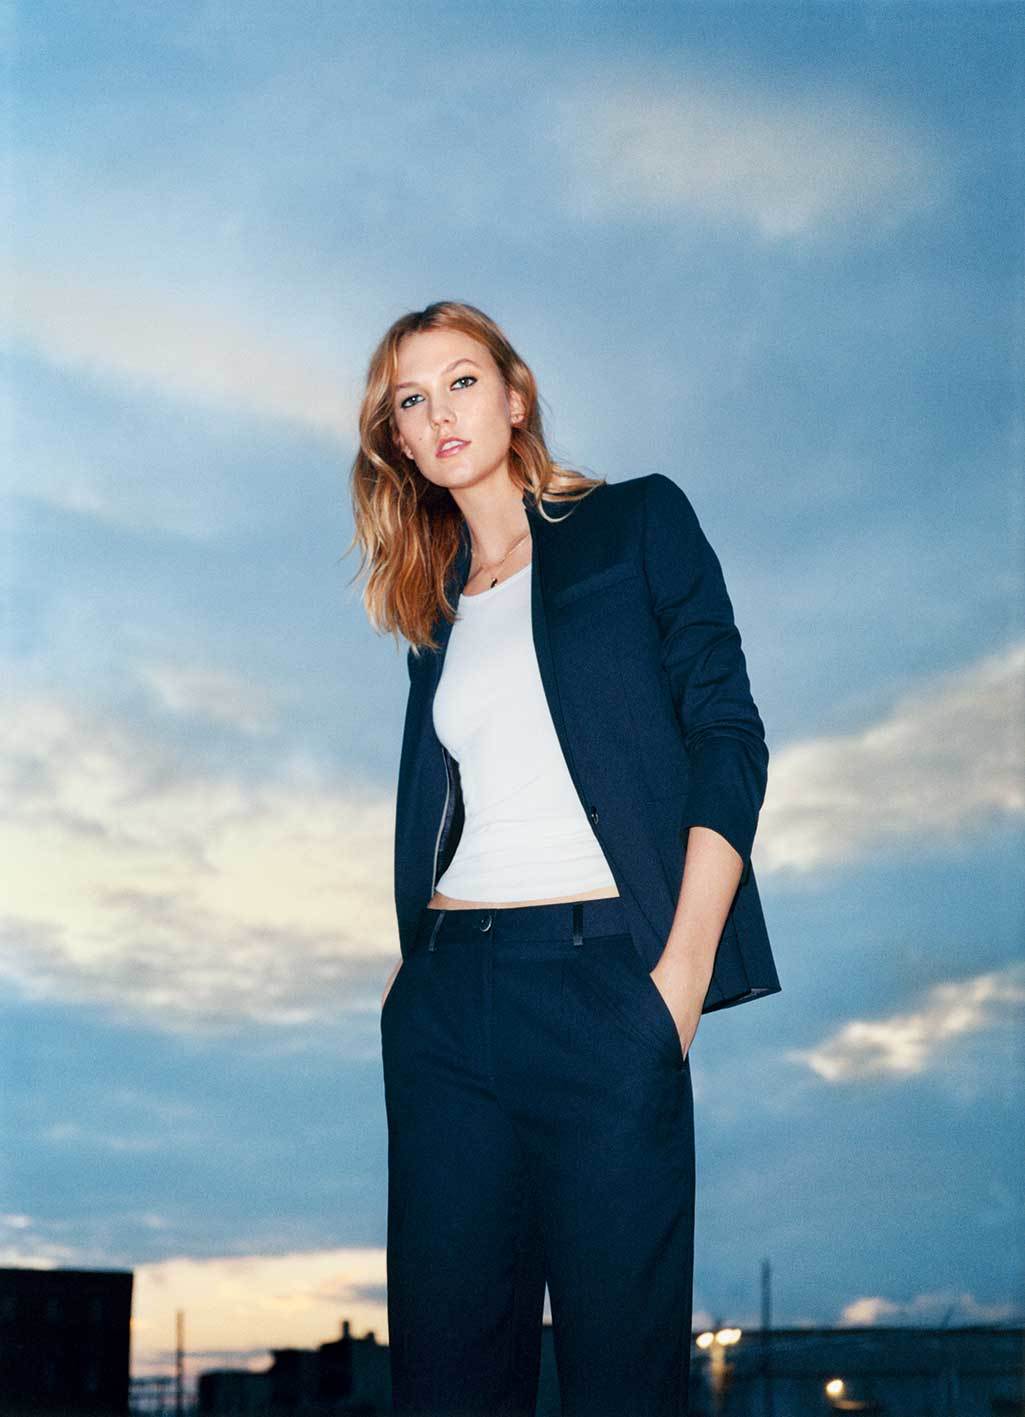 karlie kloss returns to her roots in topshop campaign - i-D1025 x 1417